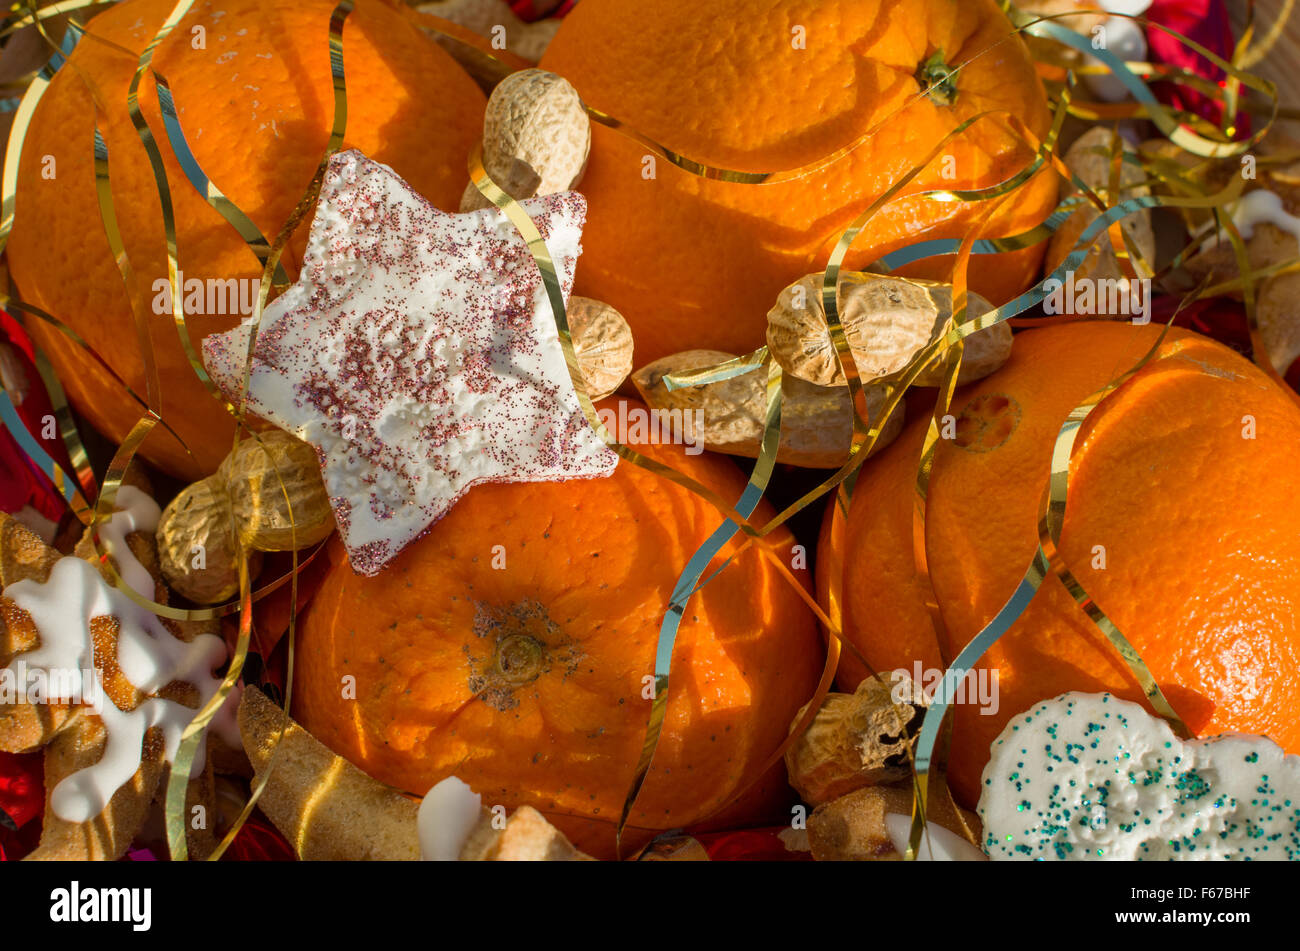 Christmas Still with Oranges Peanuts and Star Decoration Covered with Angel Hair Closeup Stock Photo